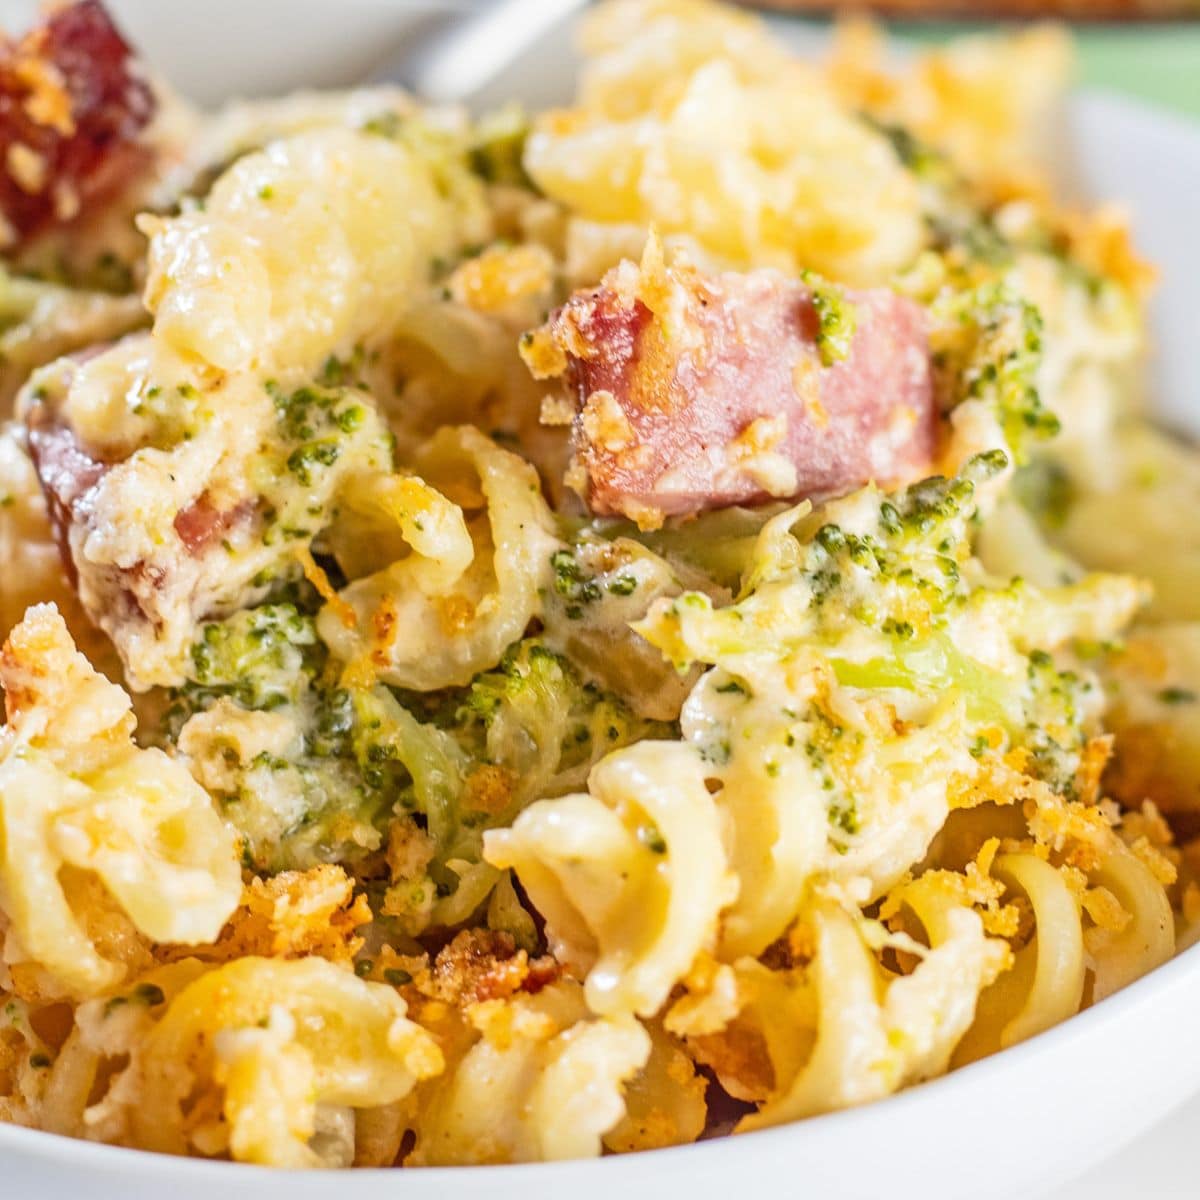 Best Add-Ins To Upgrade Macaroni And Cheese: 20+ Delicious Options To Try Today!